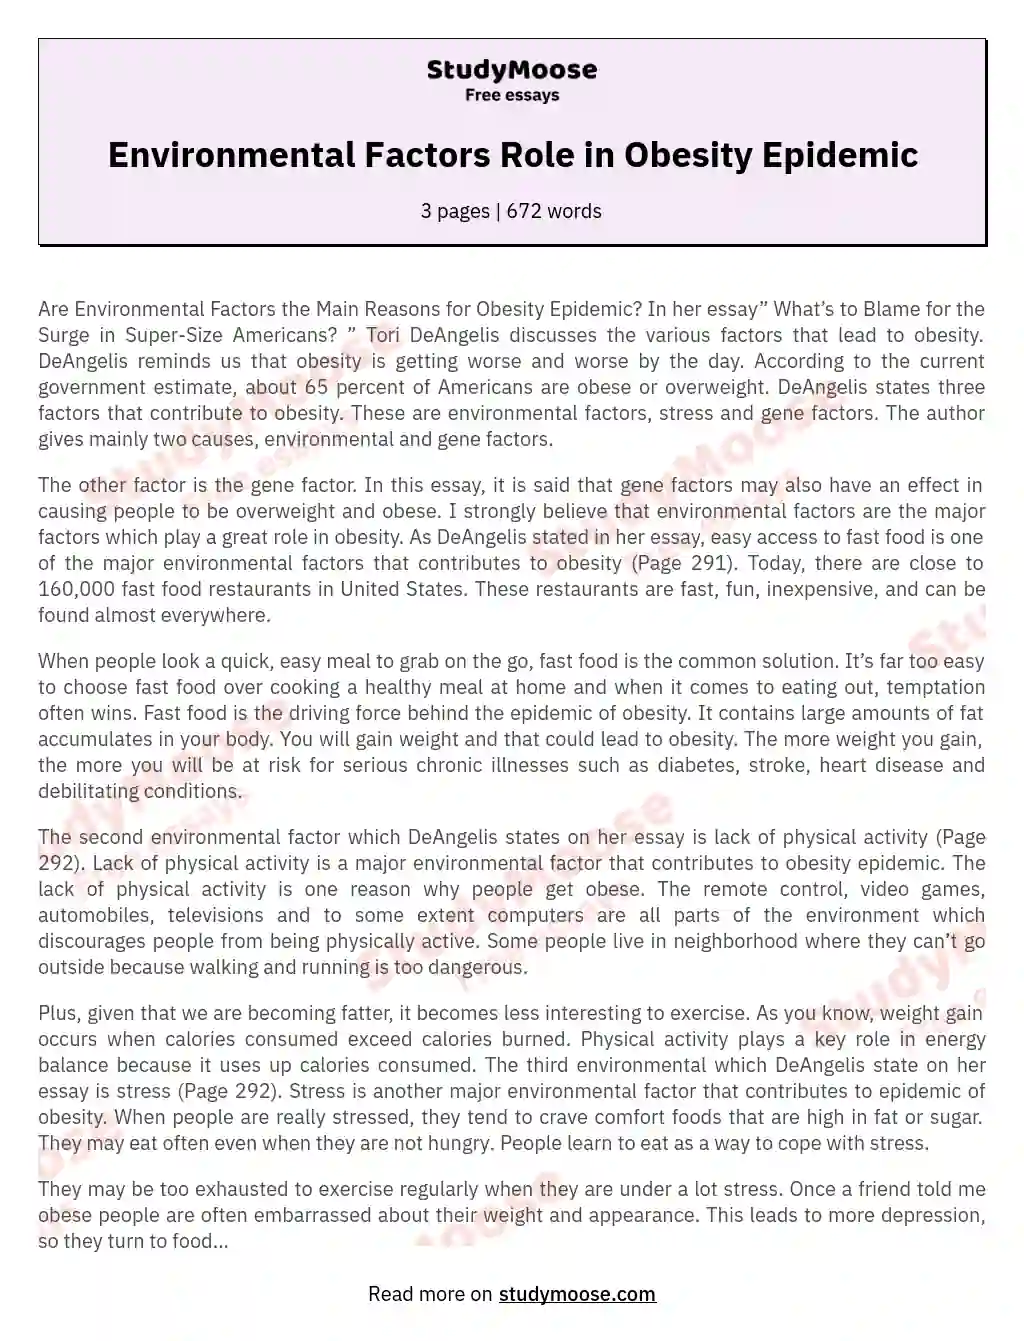 Environmental Factors Role in Obesity Epidemic essay